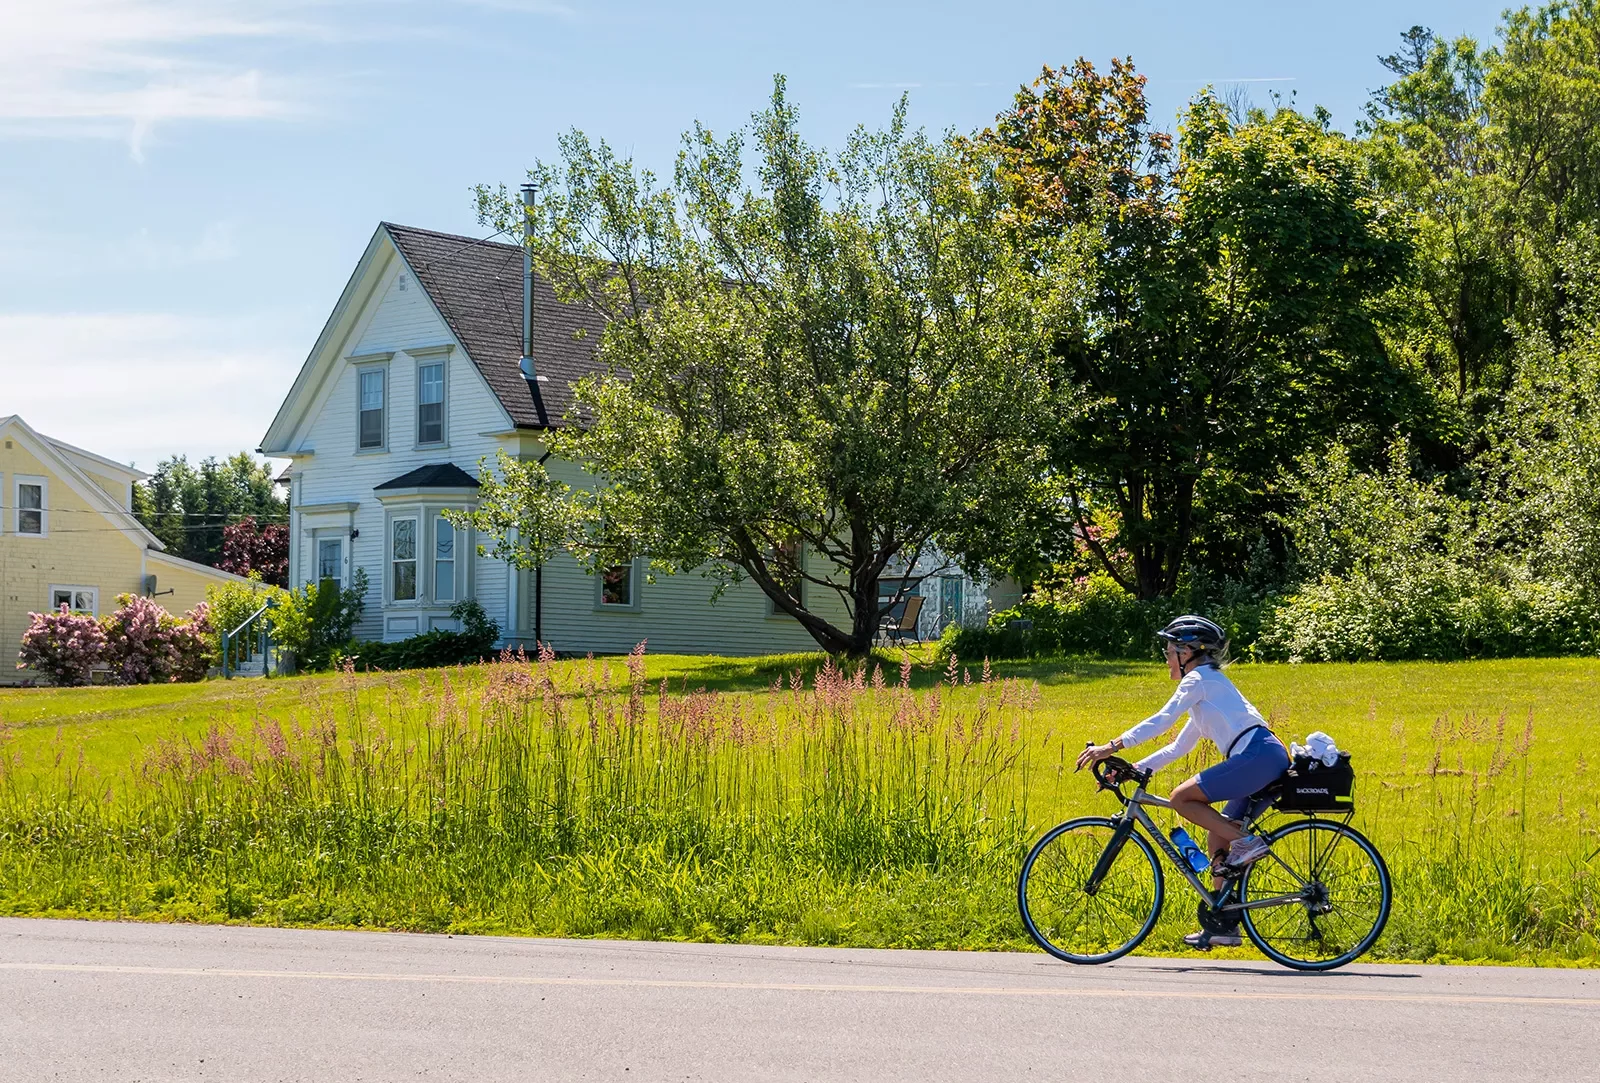 Guest cycling in front of farmhouse and field.